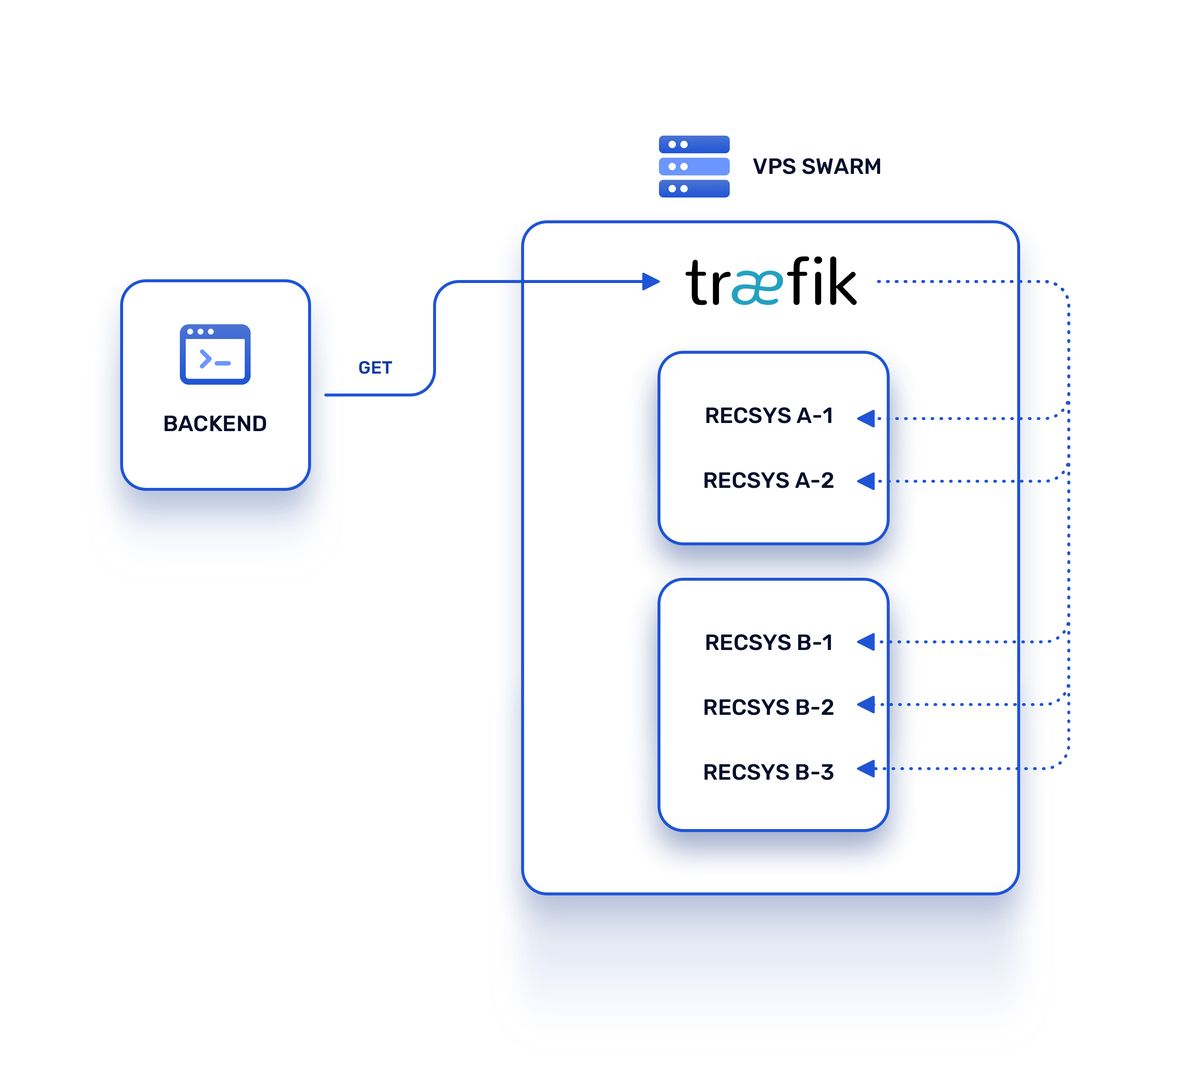 Architecture with Traefik as reverse proxy